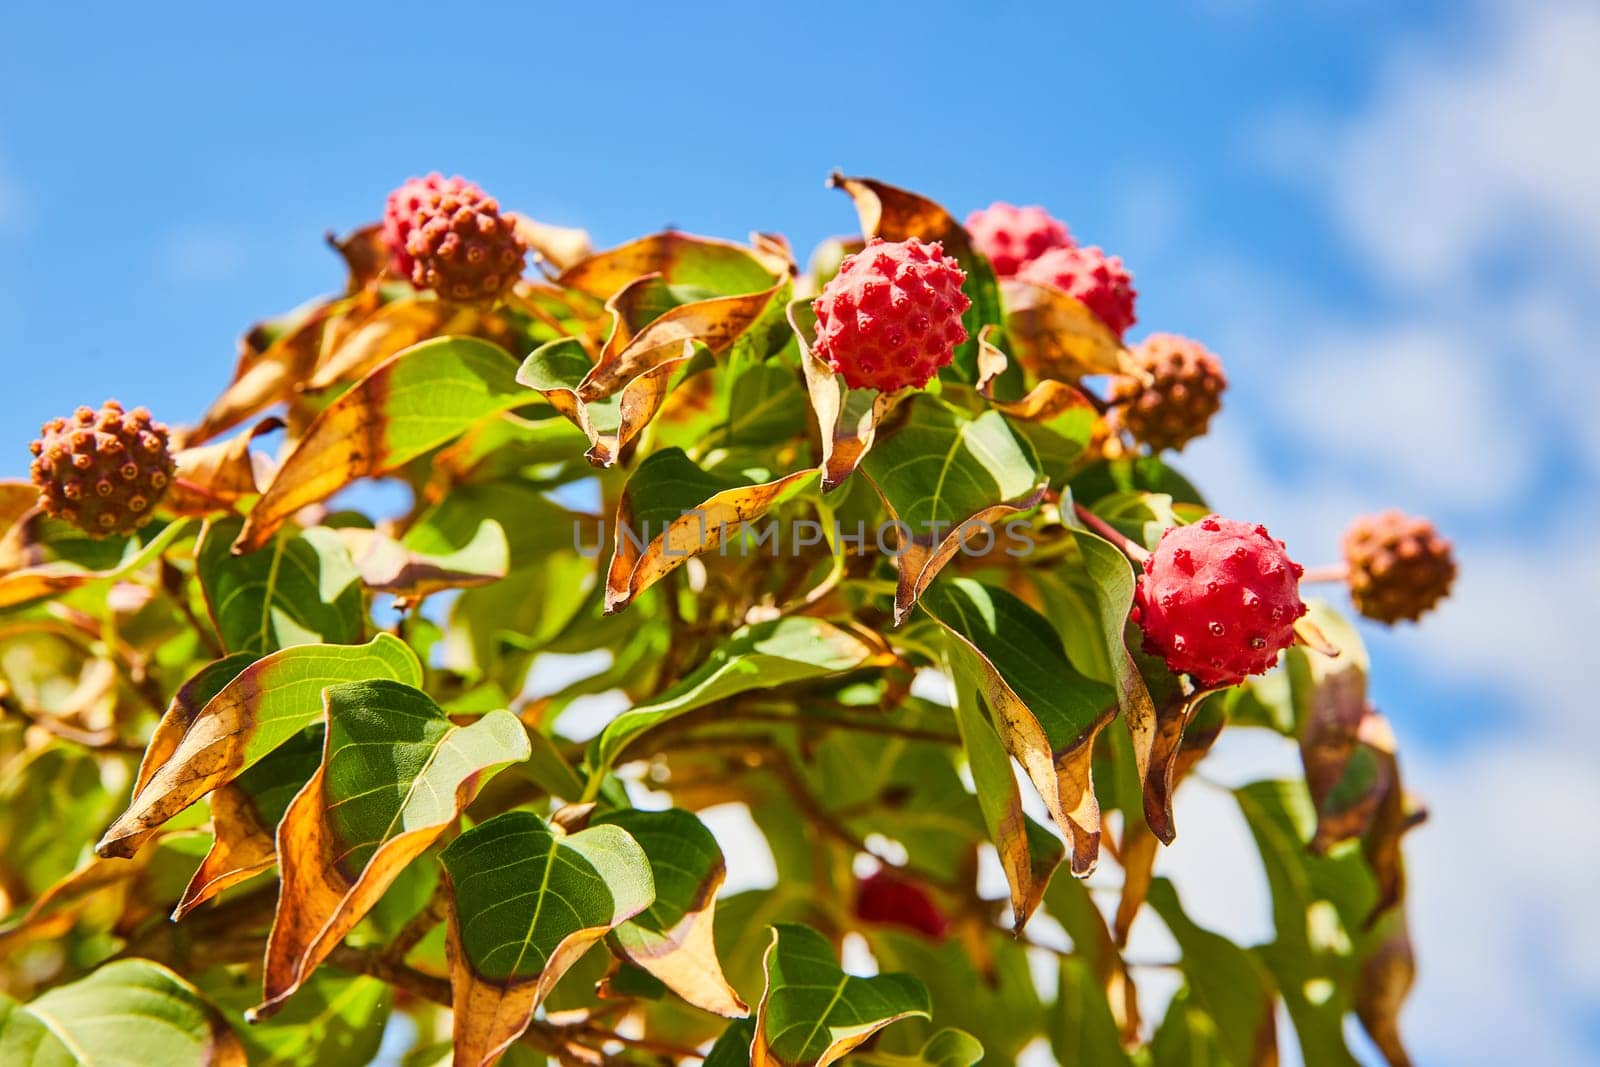 Vibrant cluster of red berries on a plant under the clear blue sky, Botanic Gardens, Elkhart, Indiana, 2023. Depicting nature's vitality, growth, and aging.